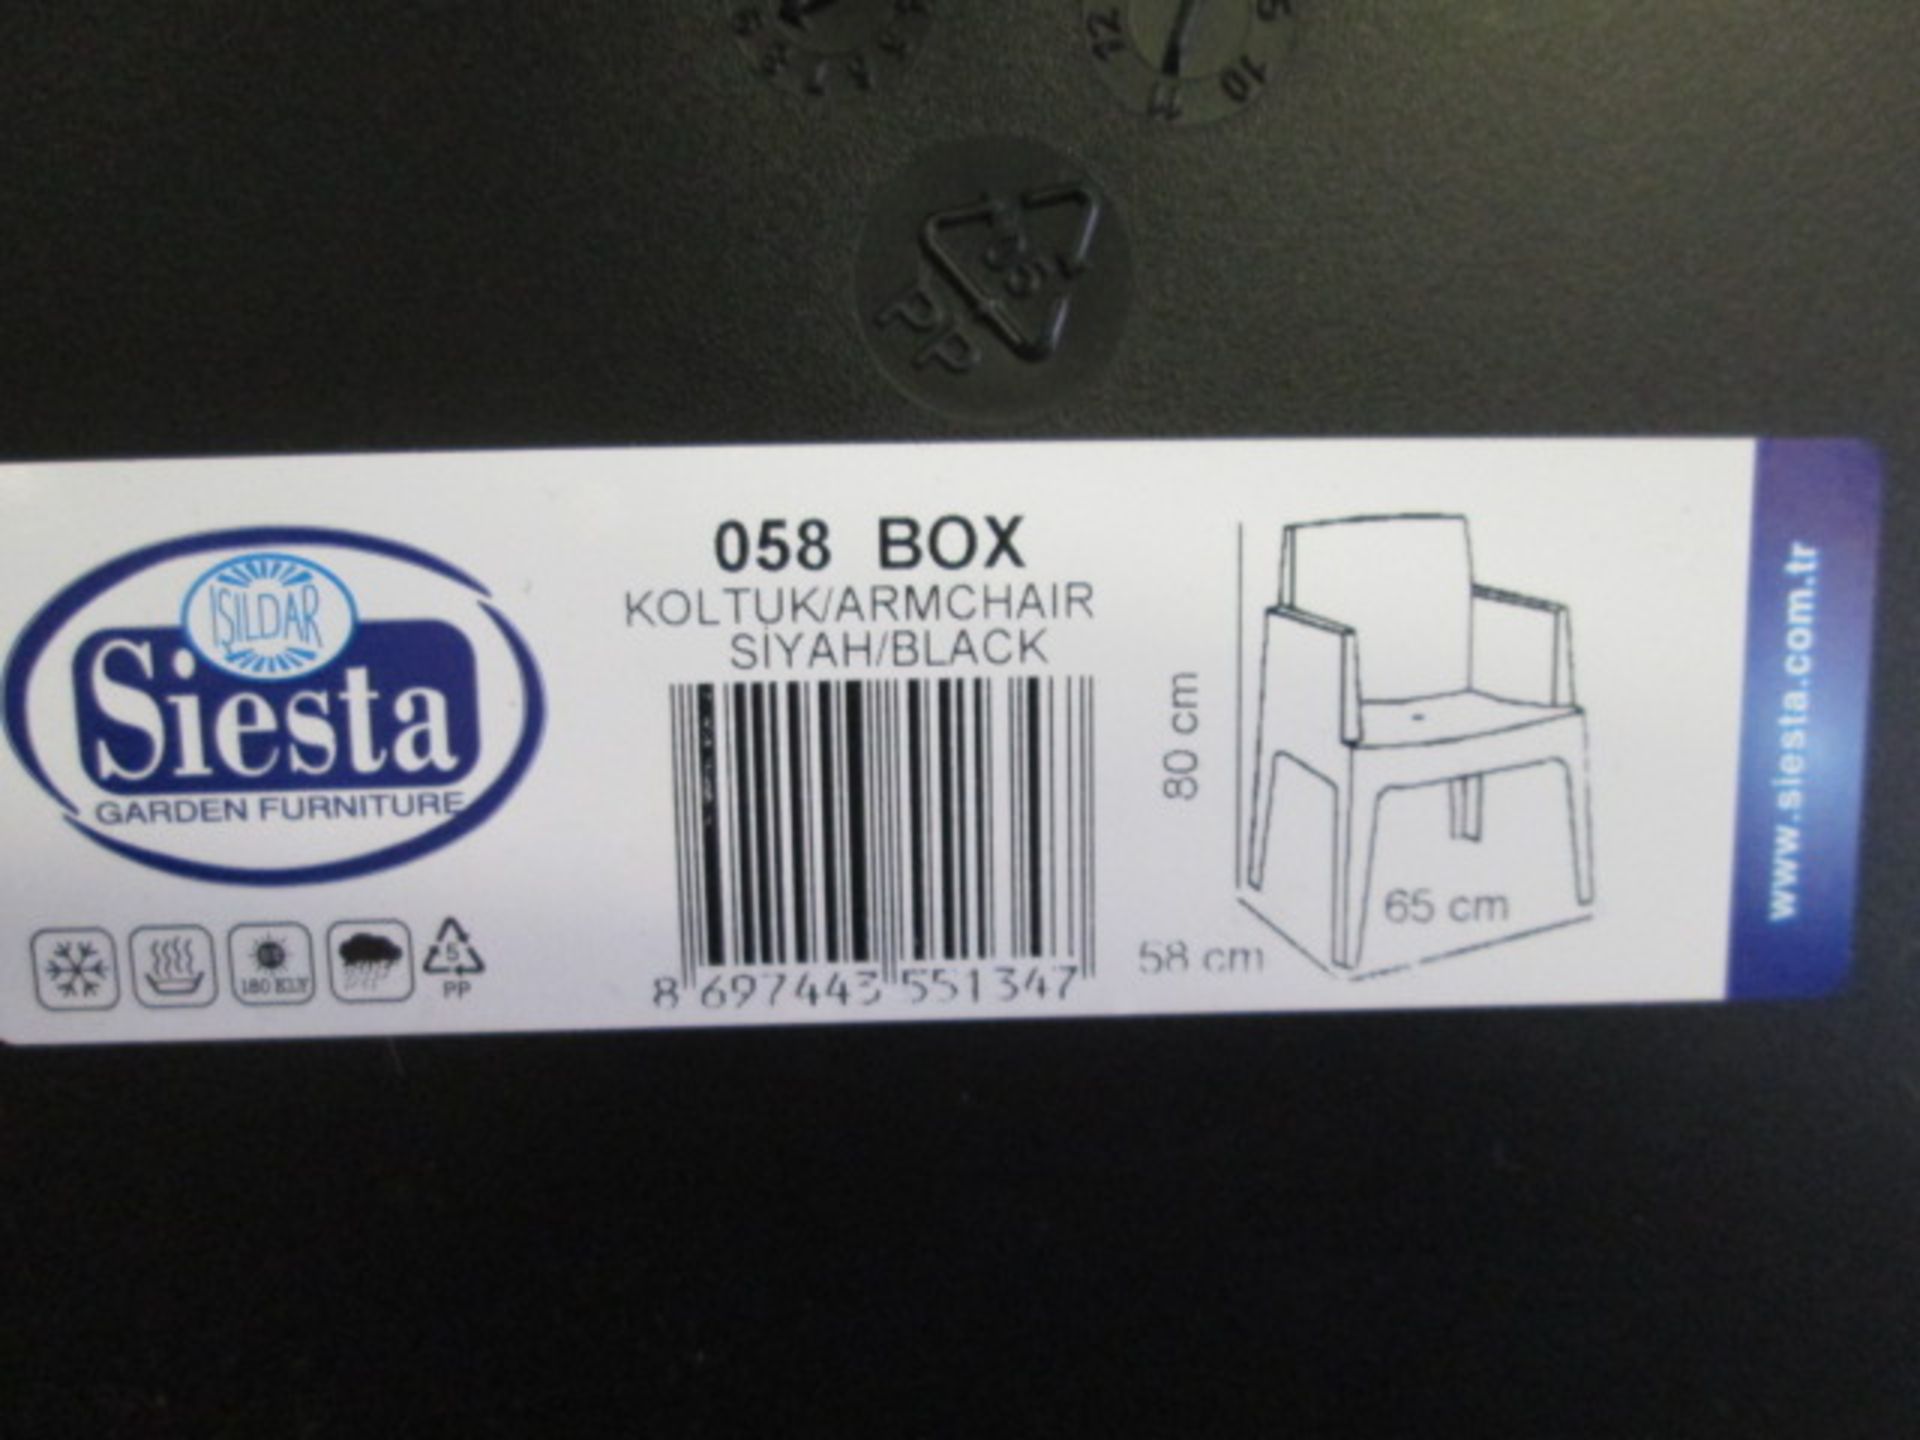 4 x Siesta Recyclable Polypropylene Stacking Outdoor Armchair in Matt Black, Model 058 Box. Comes - Image 8 of 9